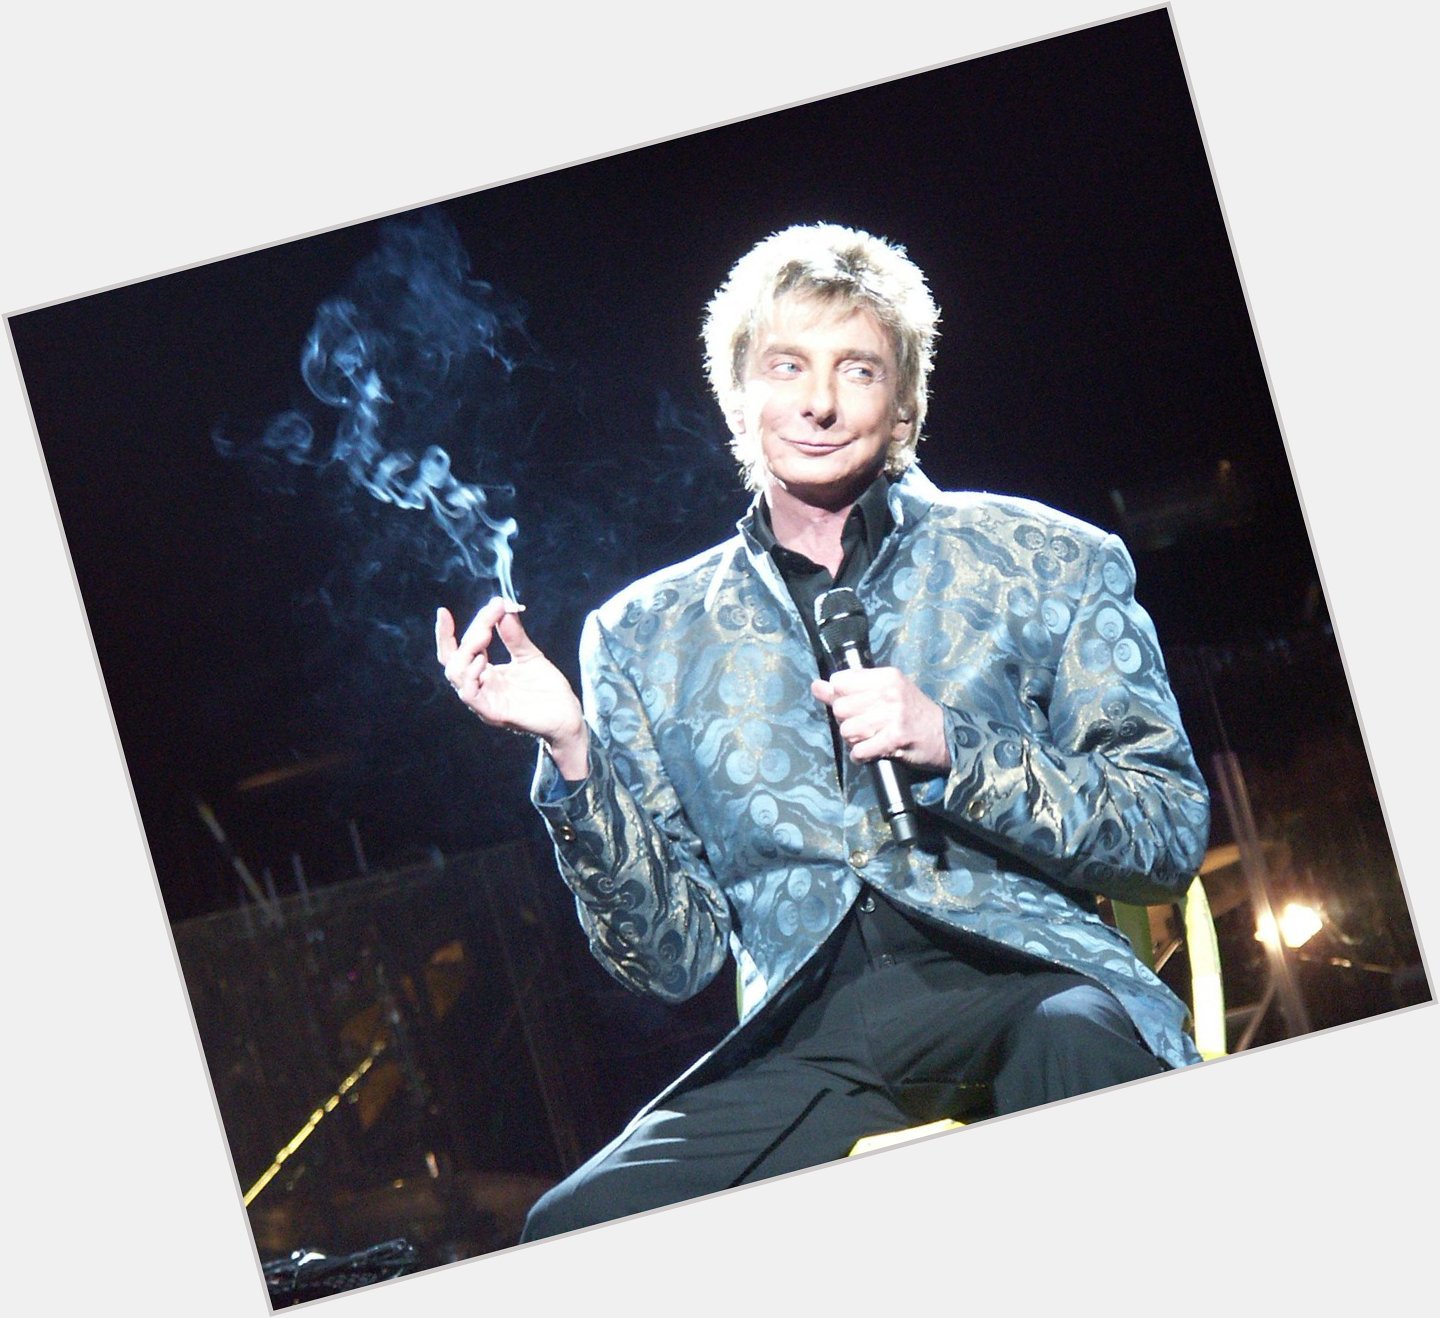 Happy Birthday to Barry Manilow who turns 74 today! 